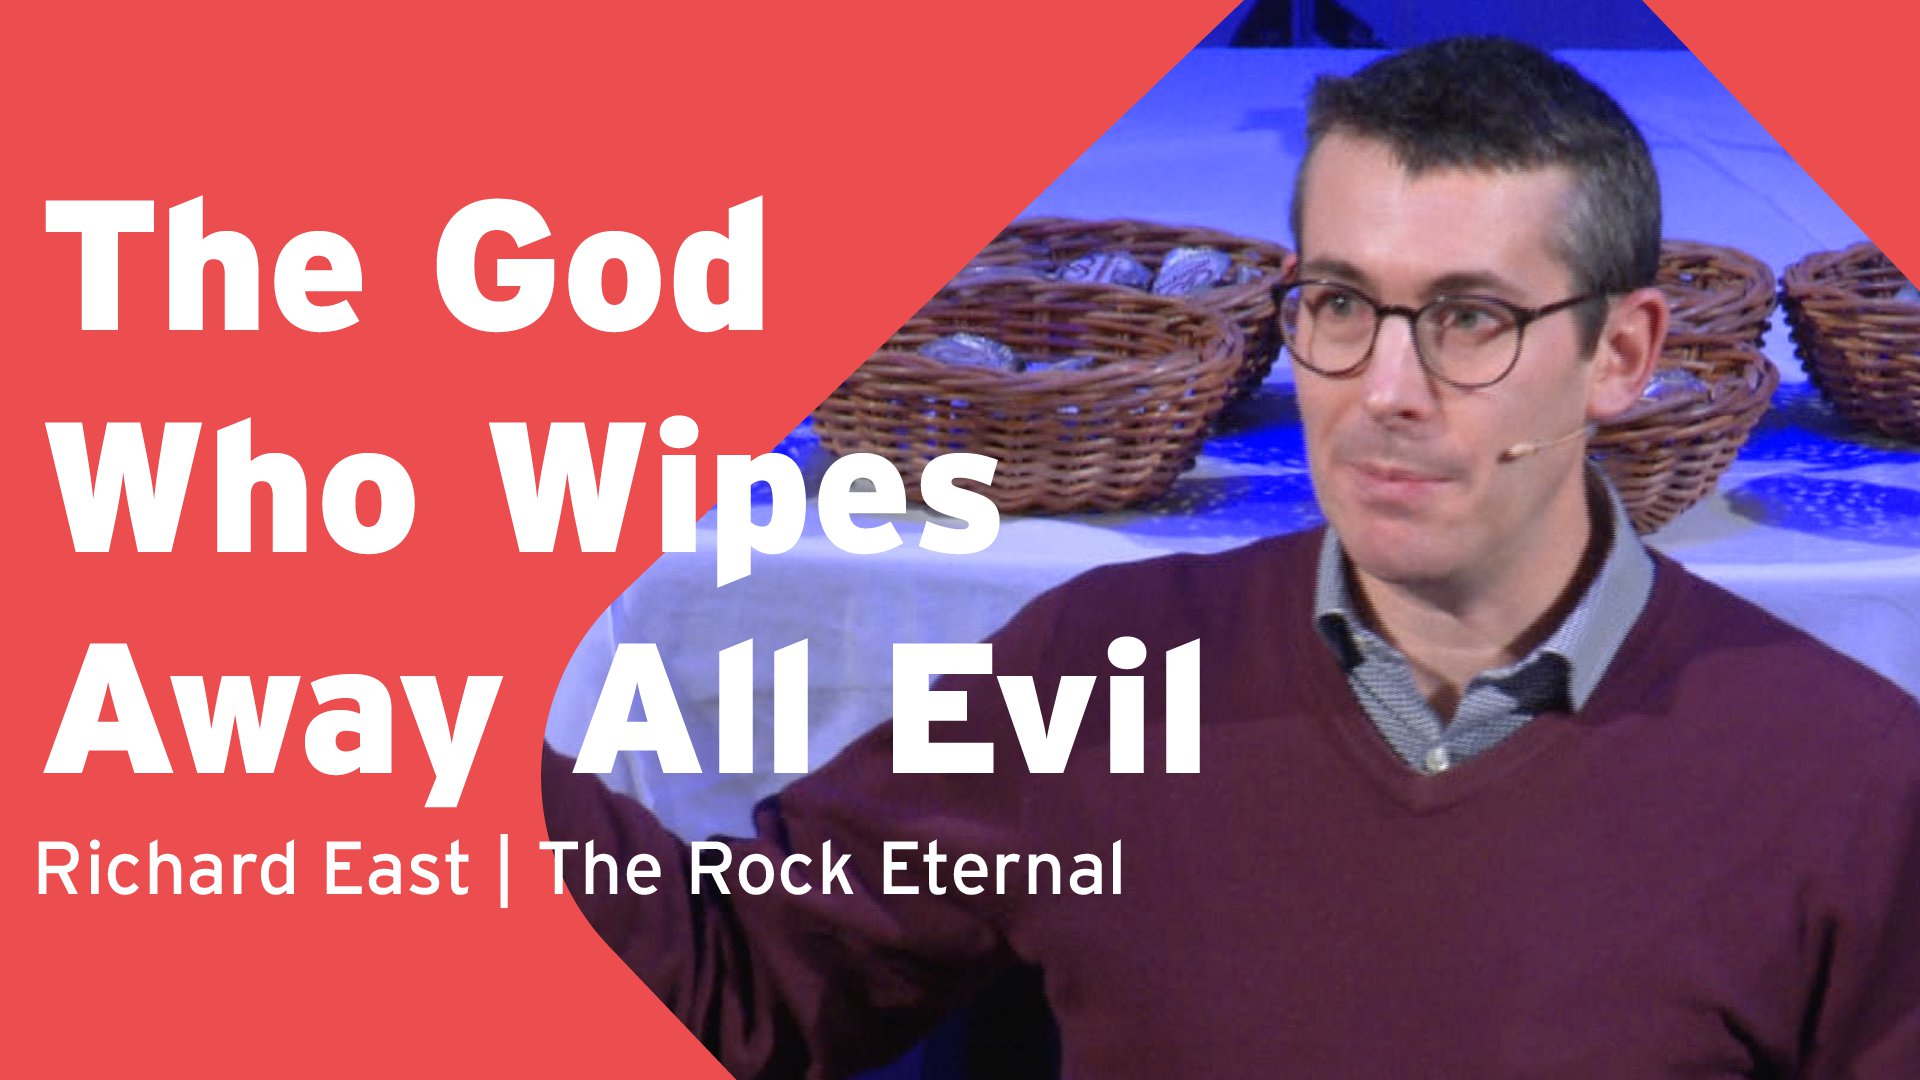 The God Who Wipes Away All Evil